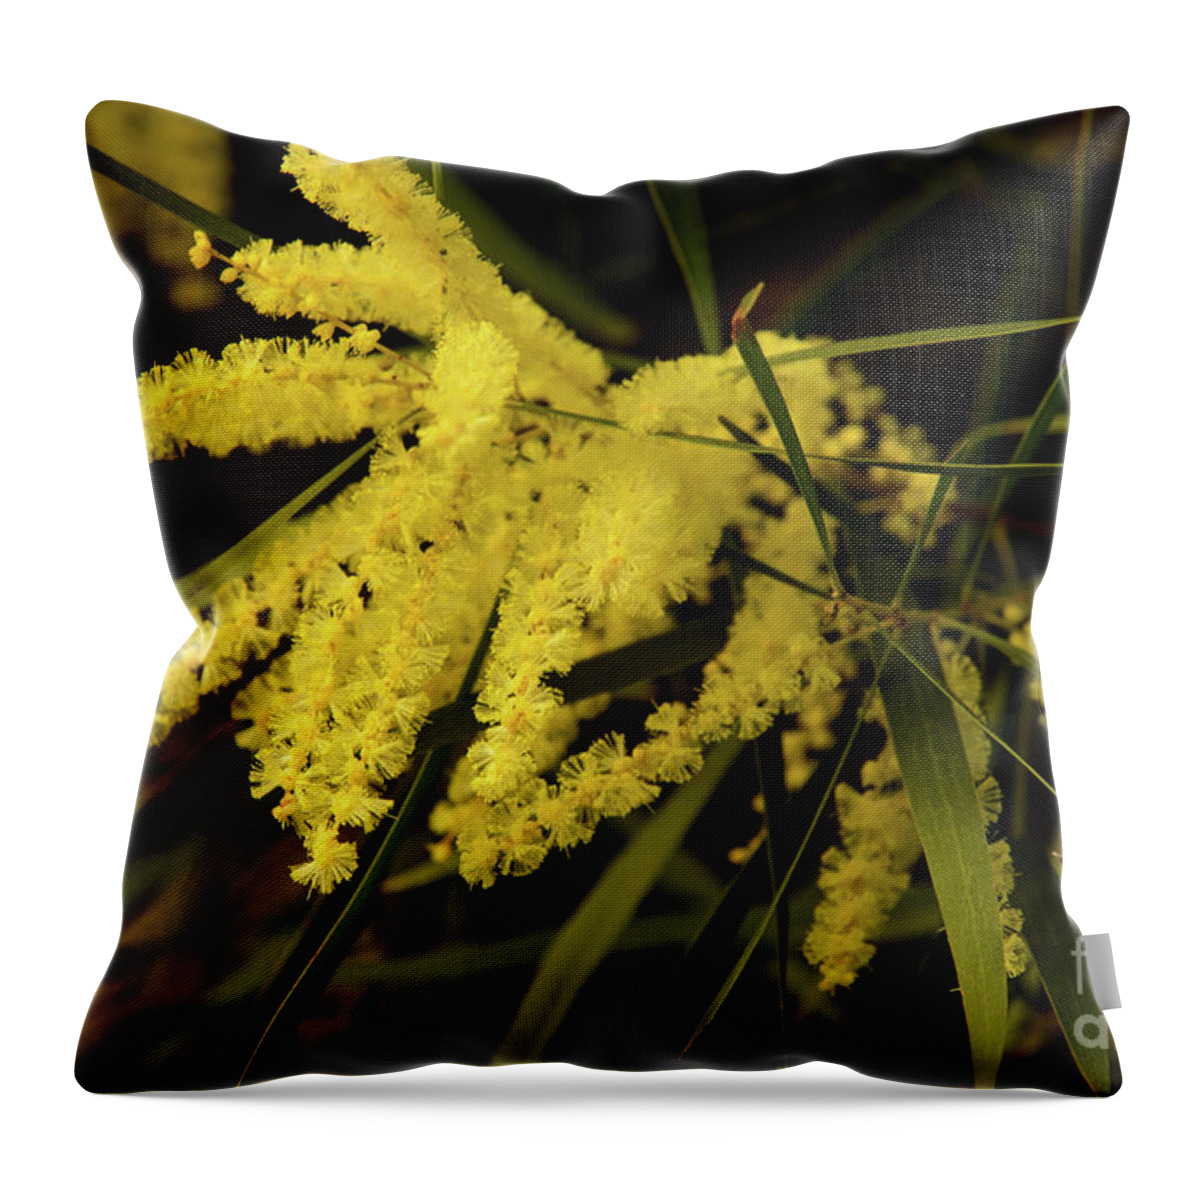 Flora;plant;flower;acacia;wattle;yellow;wildflower Throw Pillow featuring the photograph Wattle C02 by Werner Padarin